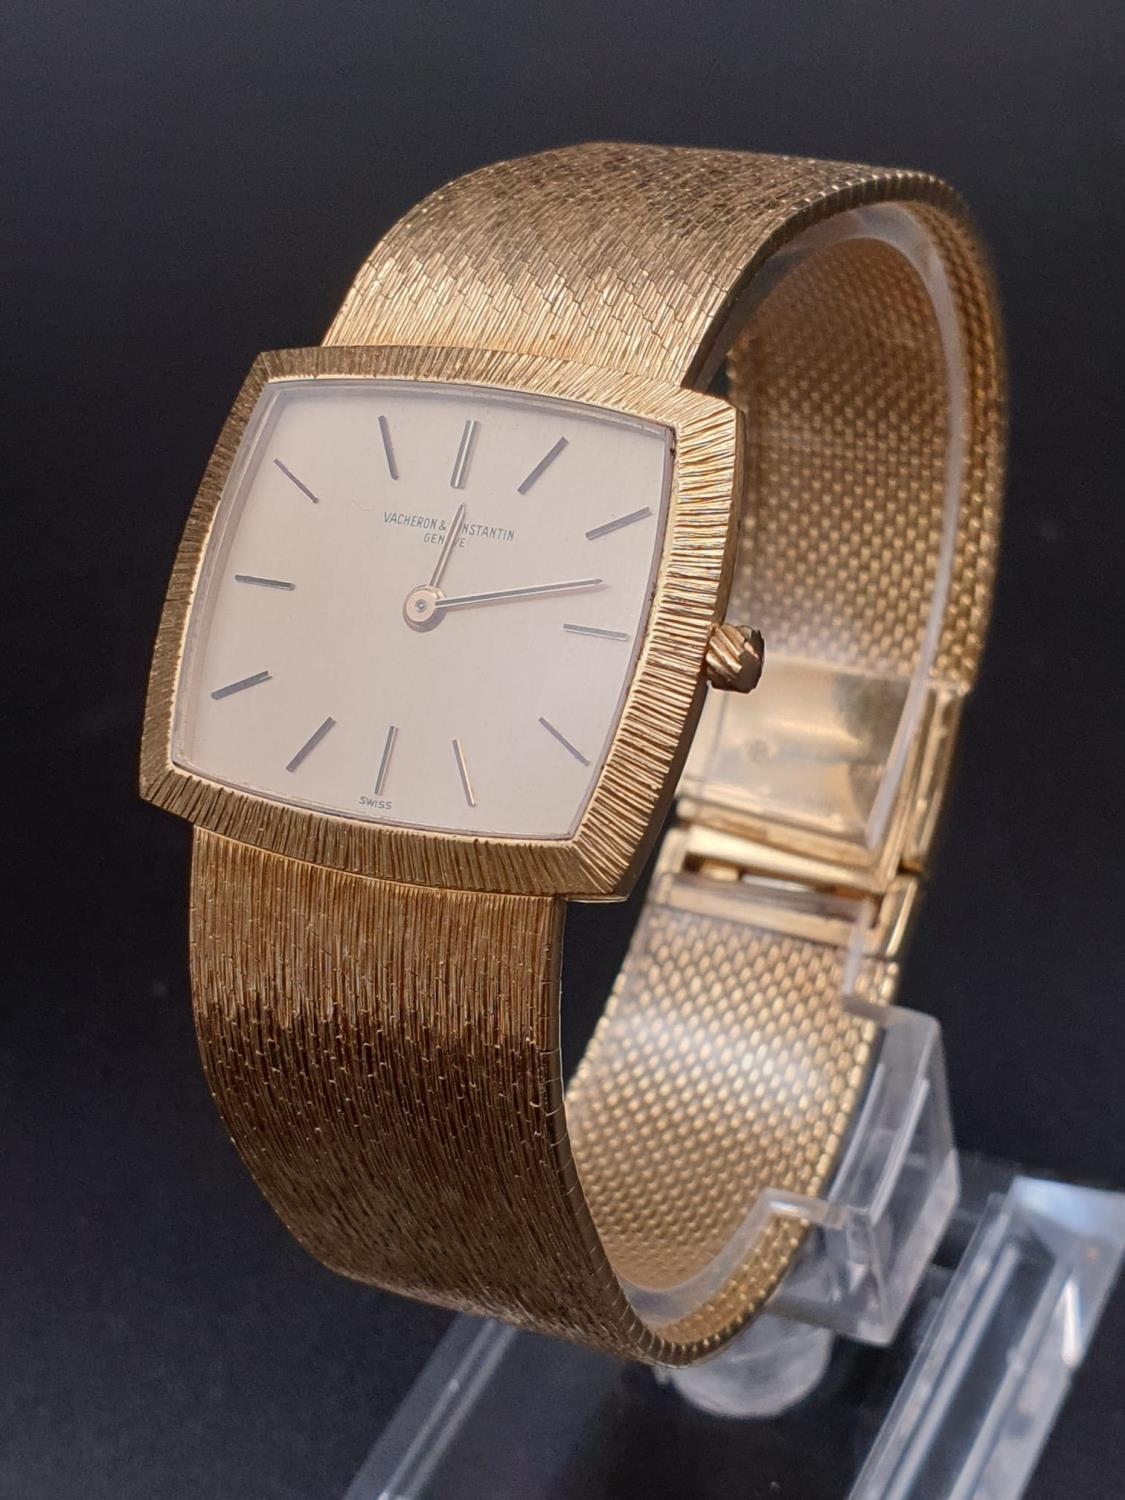 A VACHERON CONSTANTIN LADIES 18K WATCH WITH SQUARE FACE AND SOLID GOLD STRAP. 30MM - Image 2 of 10